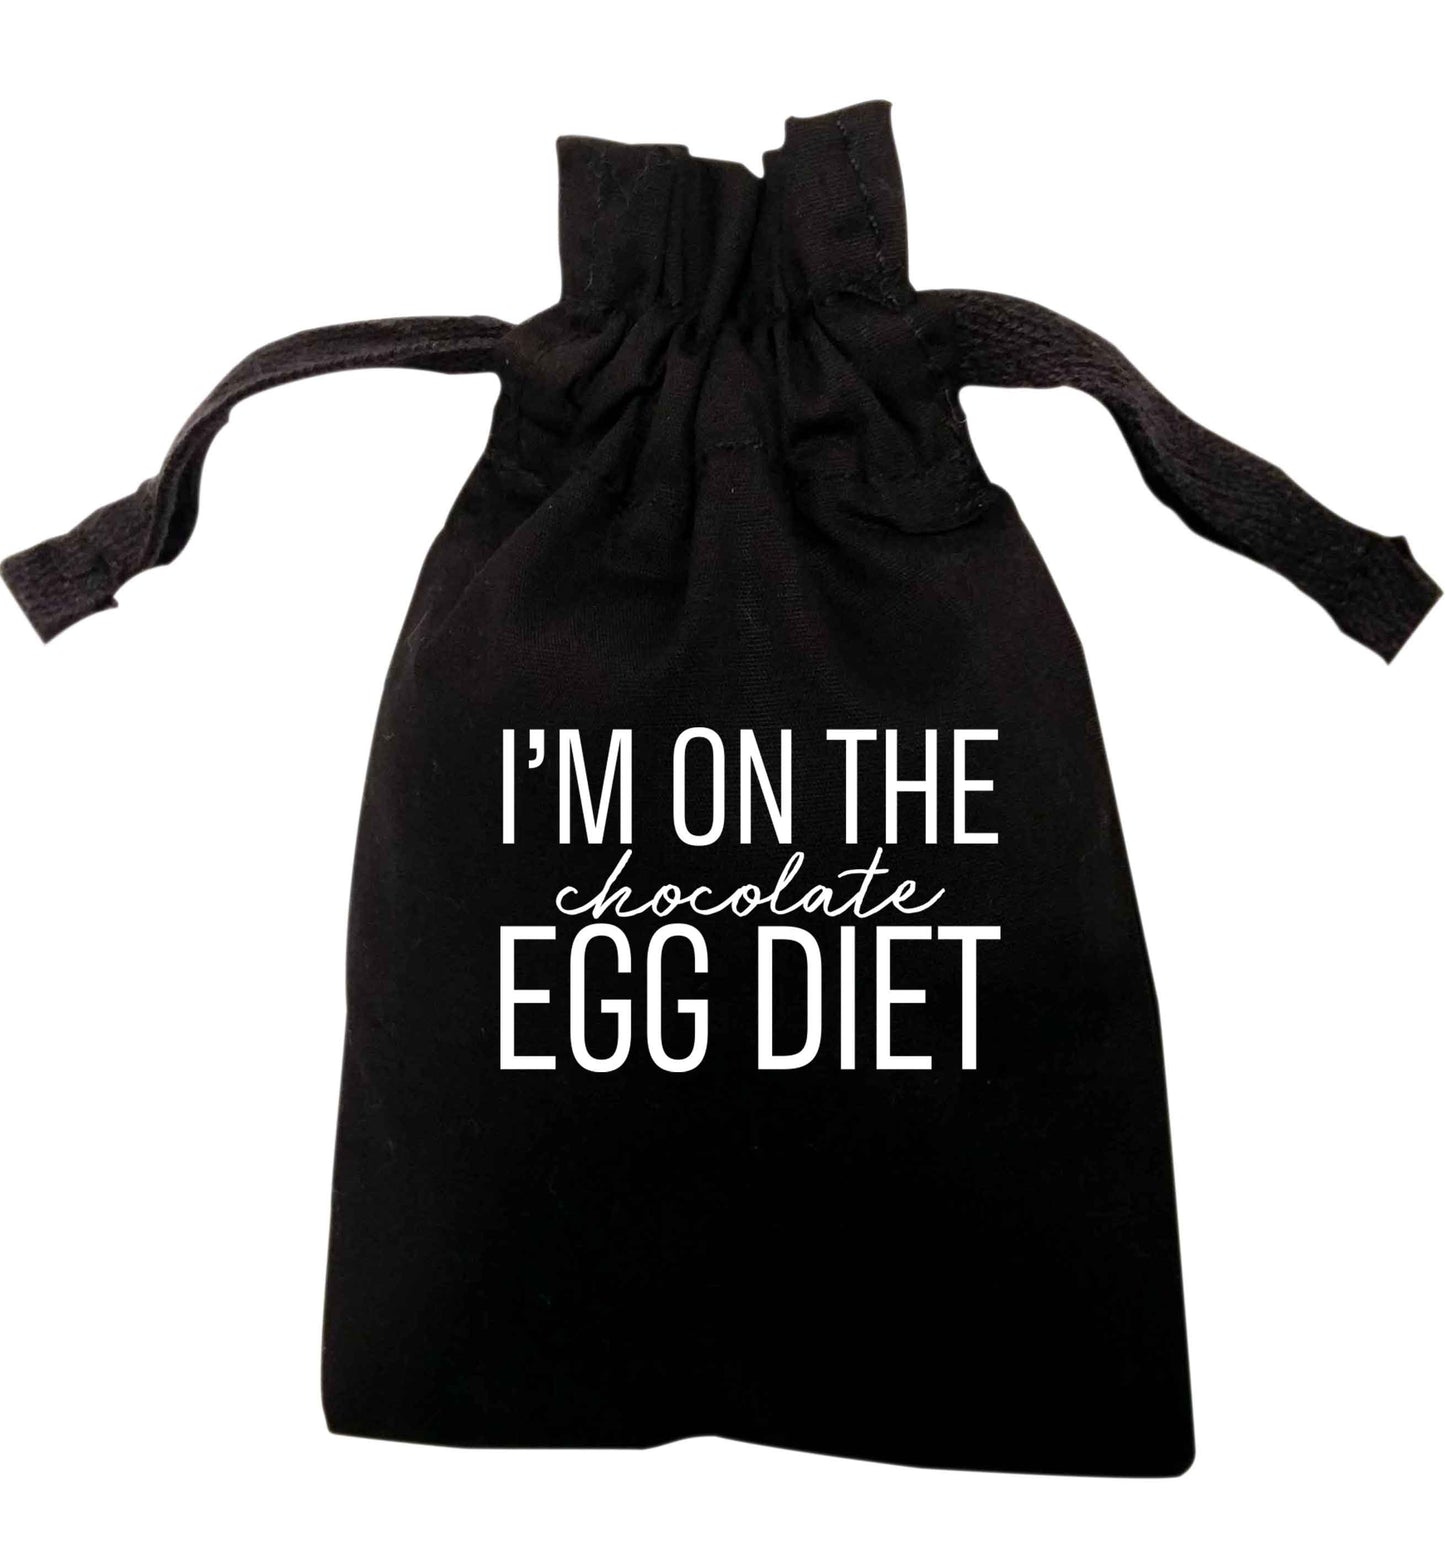 I'm on the chocolate egg diet | XS - L | Pouch / Drawstring bag / Sack | Organic Cotton | Bulk discounts available!